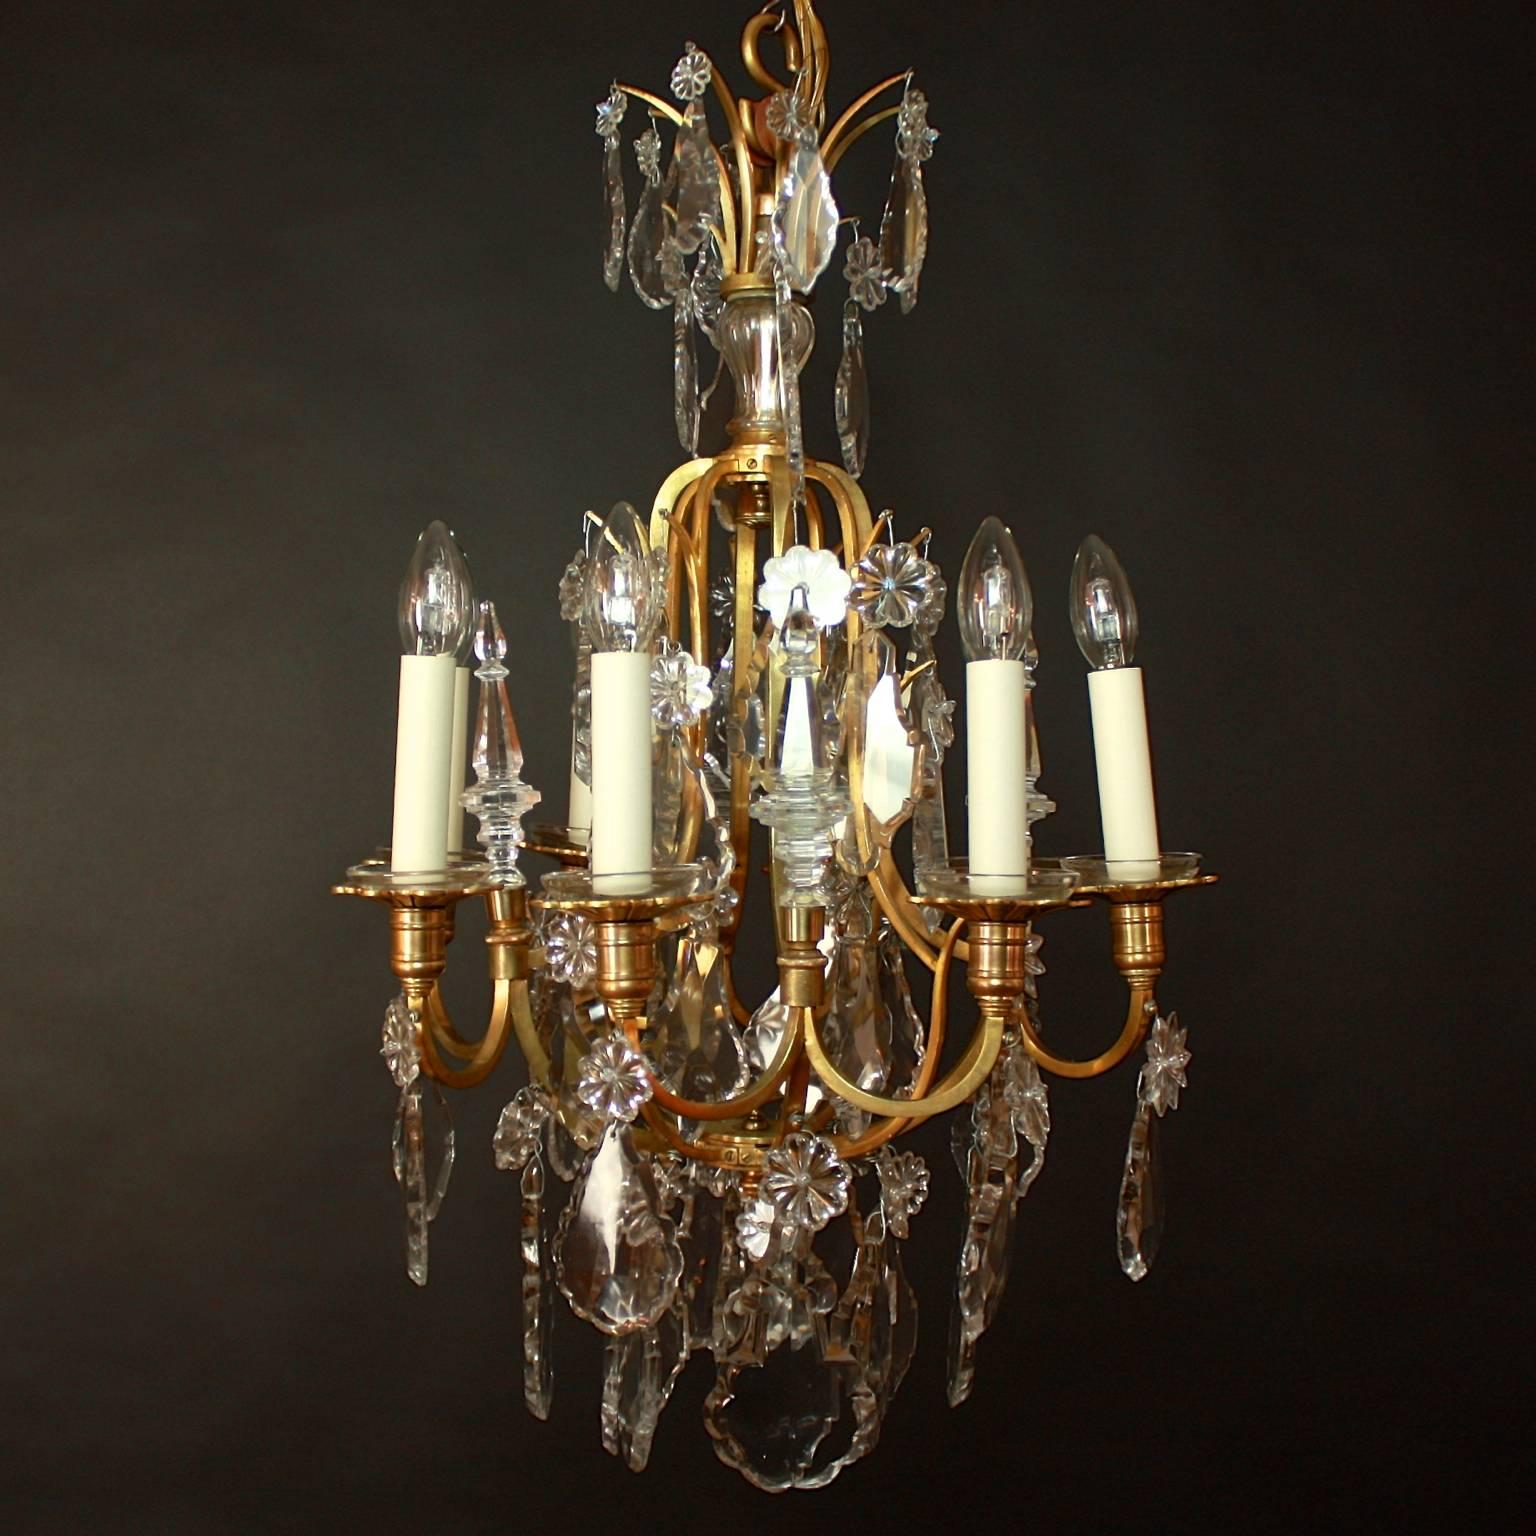 Exquisite Louis XV Style gilt bronze chandelier decorated overall in scalloped cut crystal pendalogues with stellar jewels and moulded baluster pinnacles. The open square gauge frame supports eight square scrolling arms with foliated drip pans.